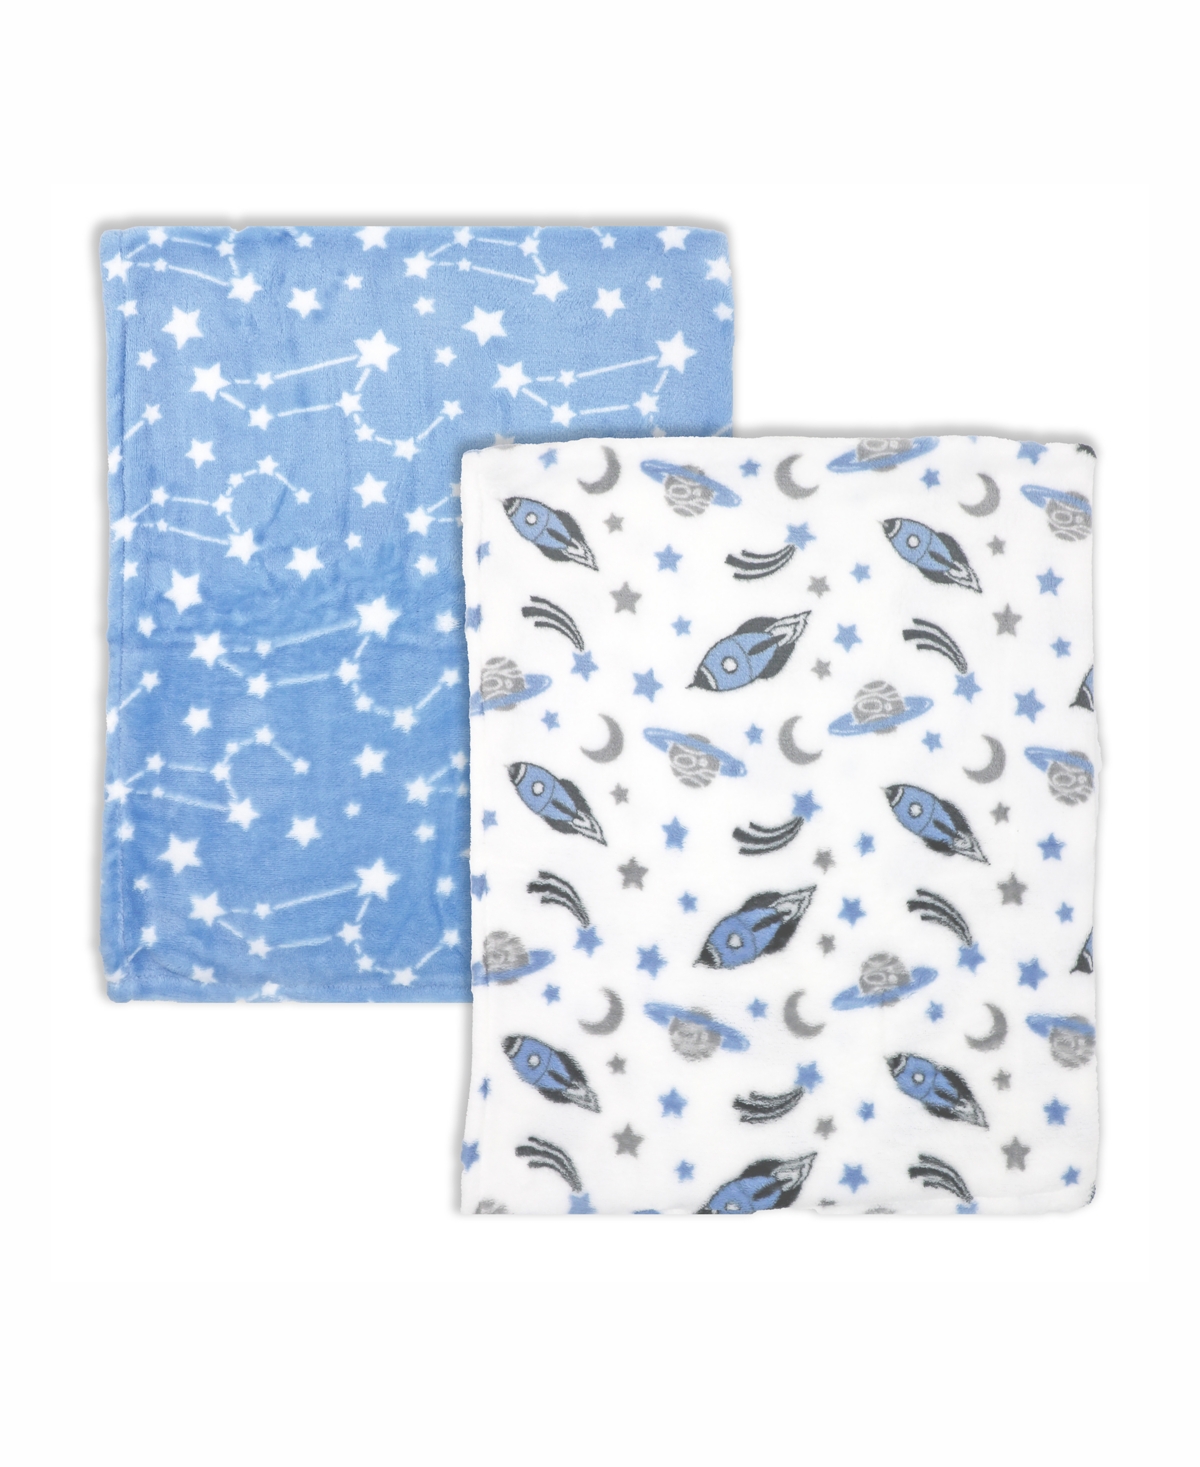 3 Stories Trading Baby Boys Cozy Flannel Fleece Blankets, Pack Of 2 In Blue And Gray